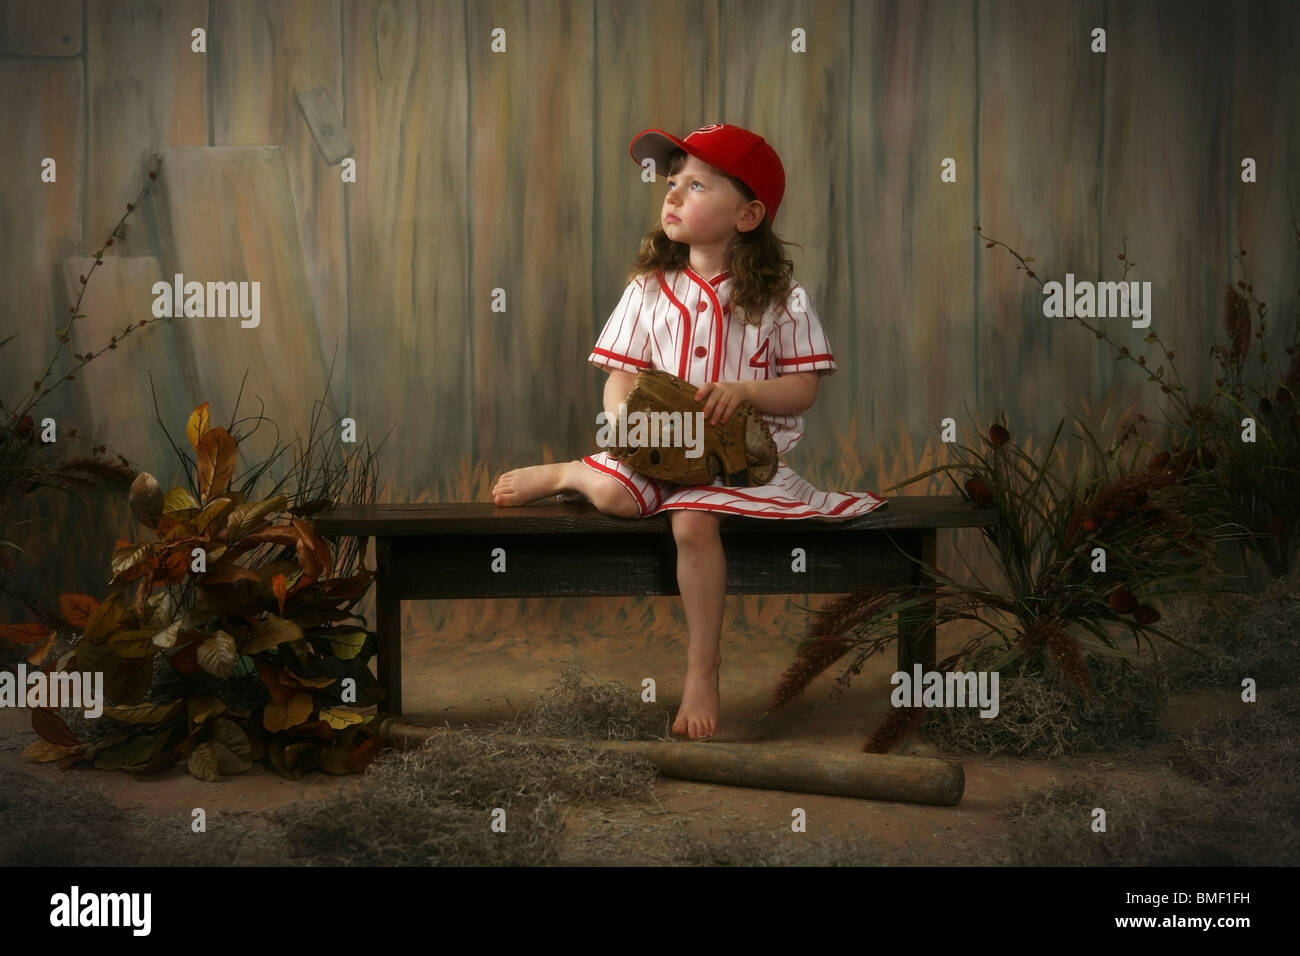 A Girl Sitting On A Bench Wearing A Vintage Girl's Baseball Uniform Stock Photo